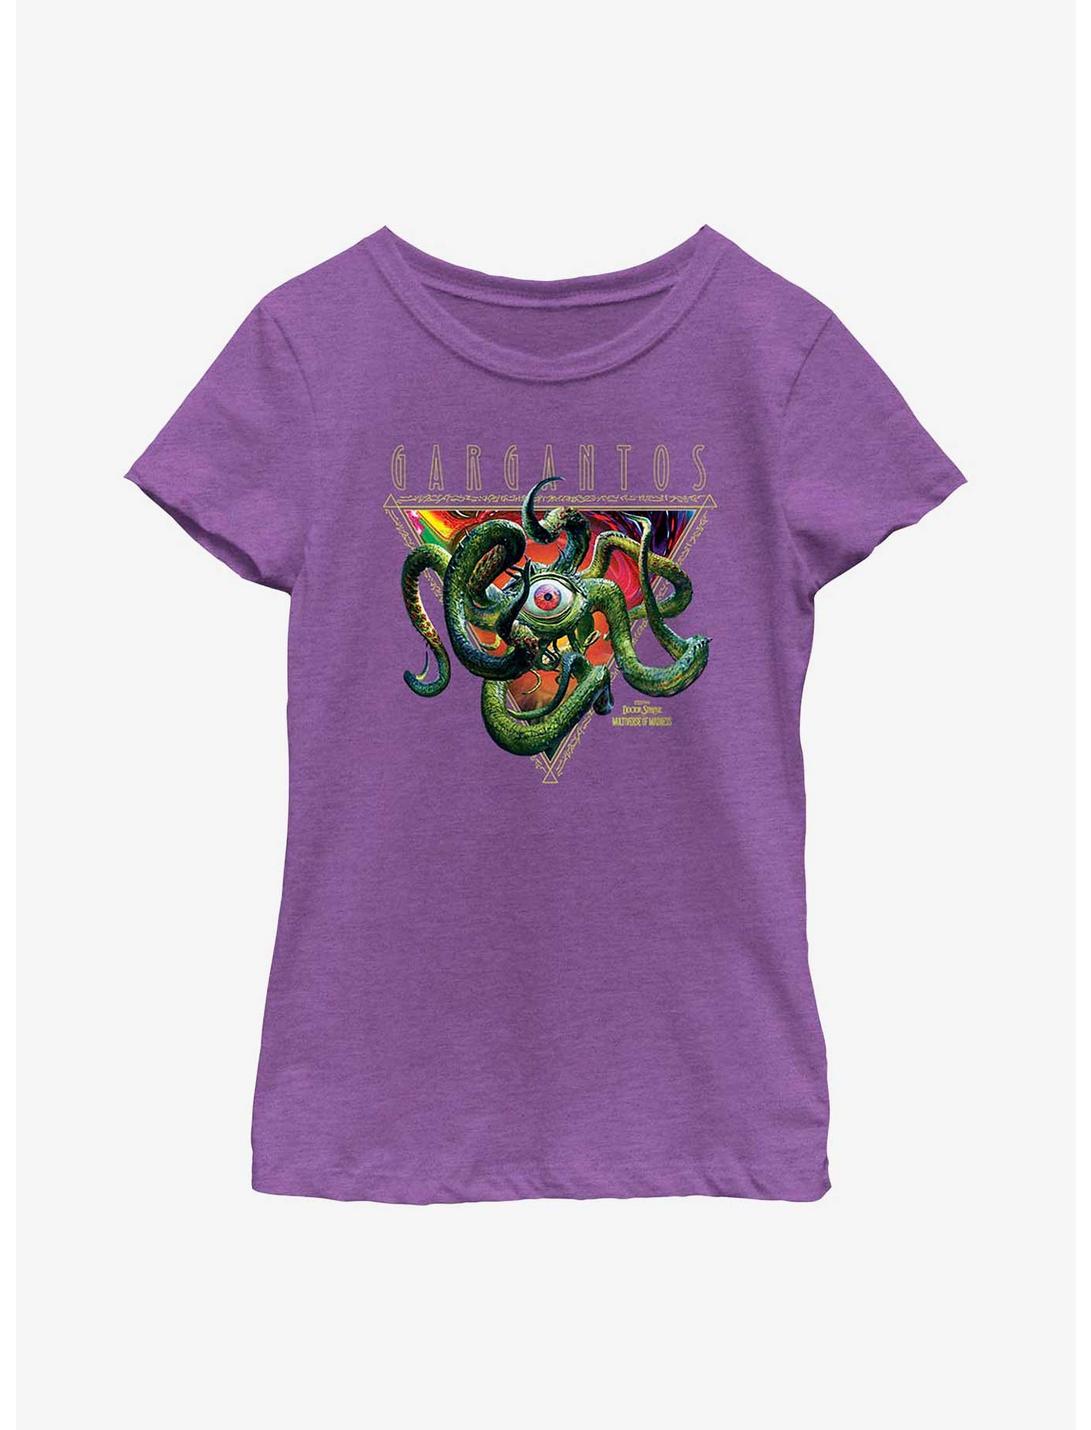 Marvel Doctor Strange In The Multiverse Of Madness Gargantos Triangle Badge Youth Girls T-Shirt, PURPLE BERRY, hi-res